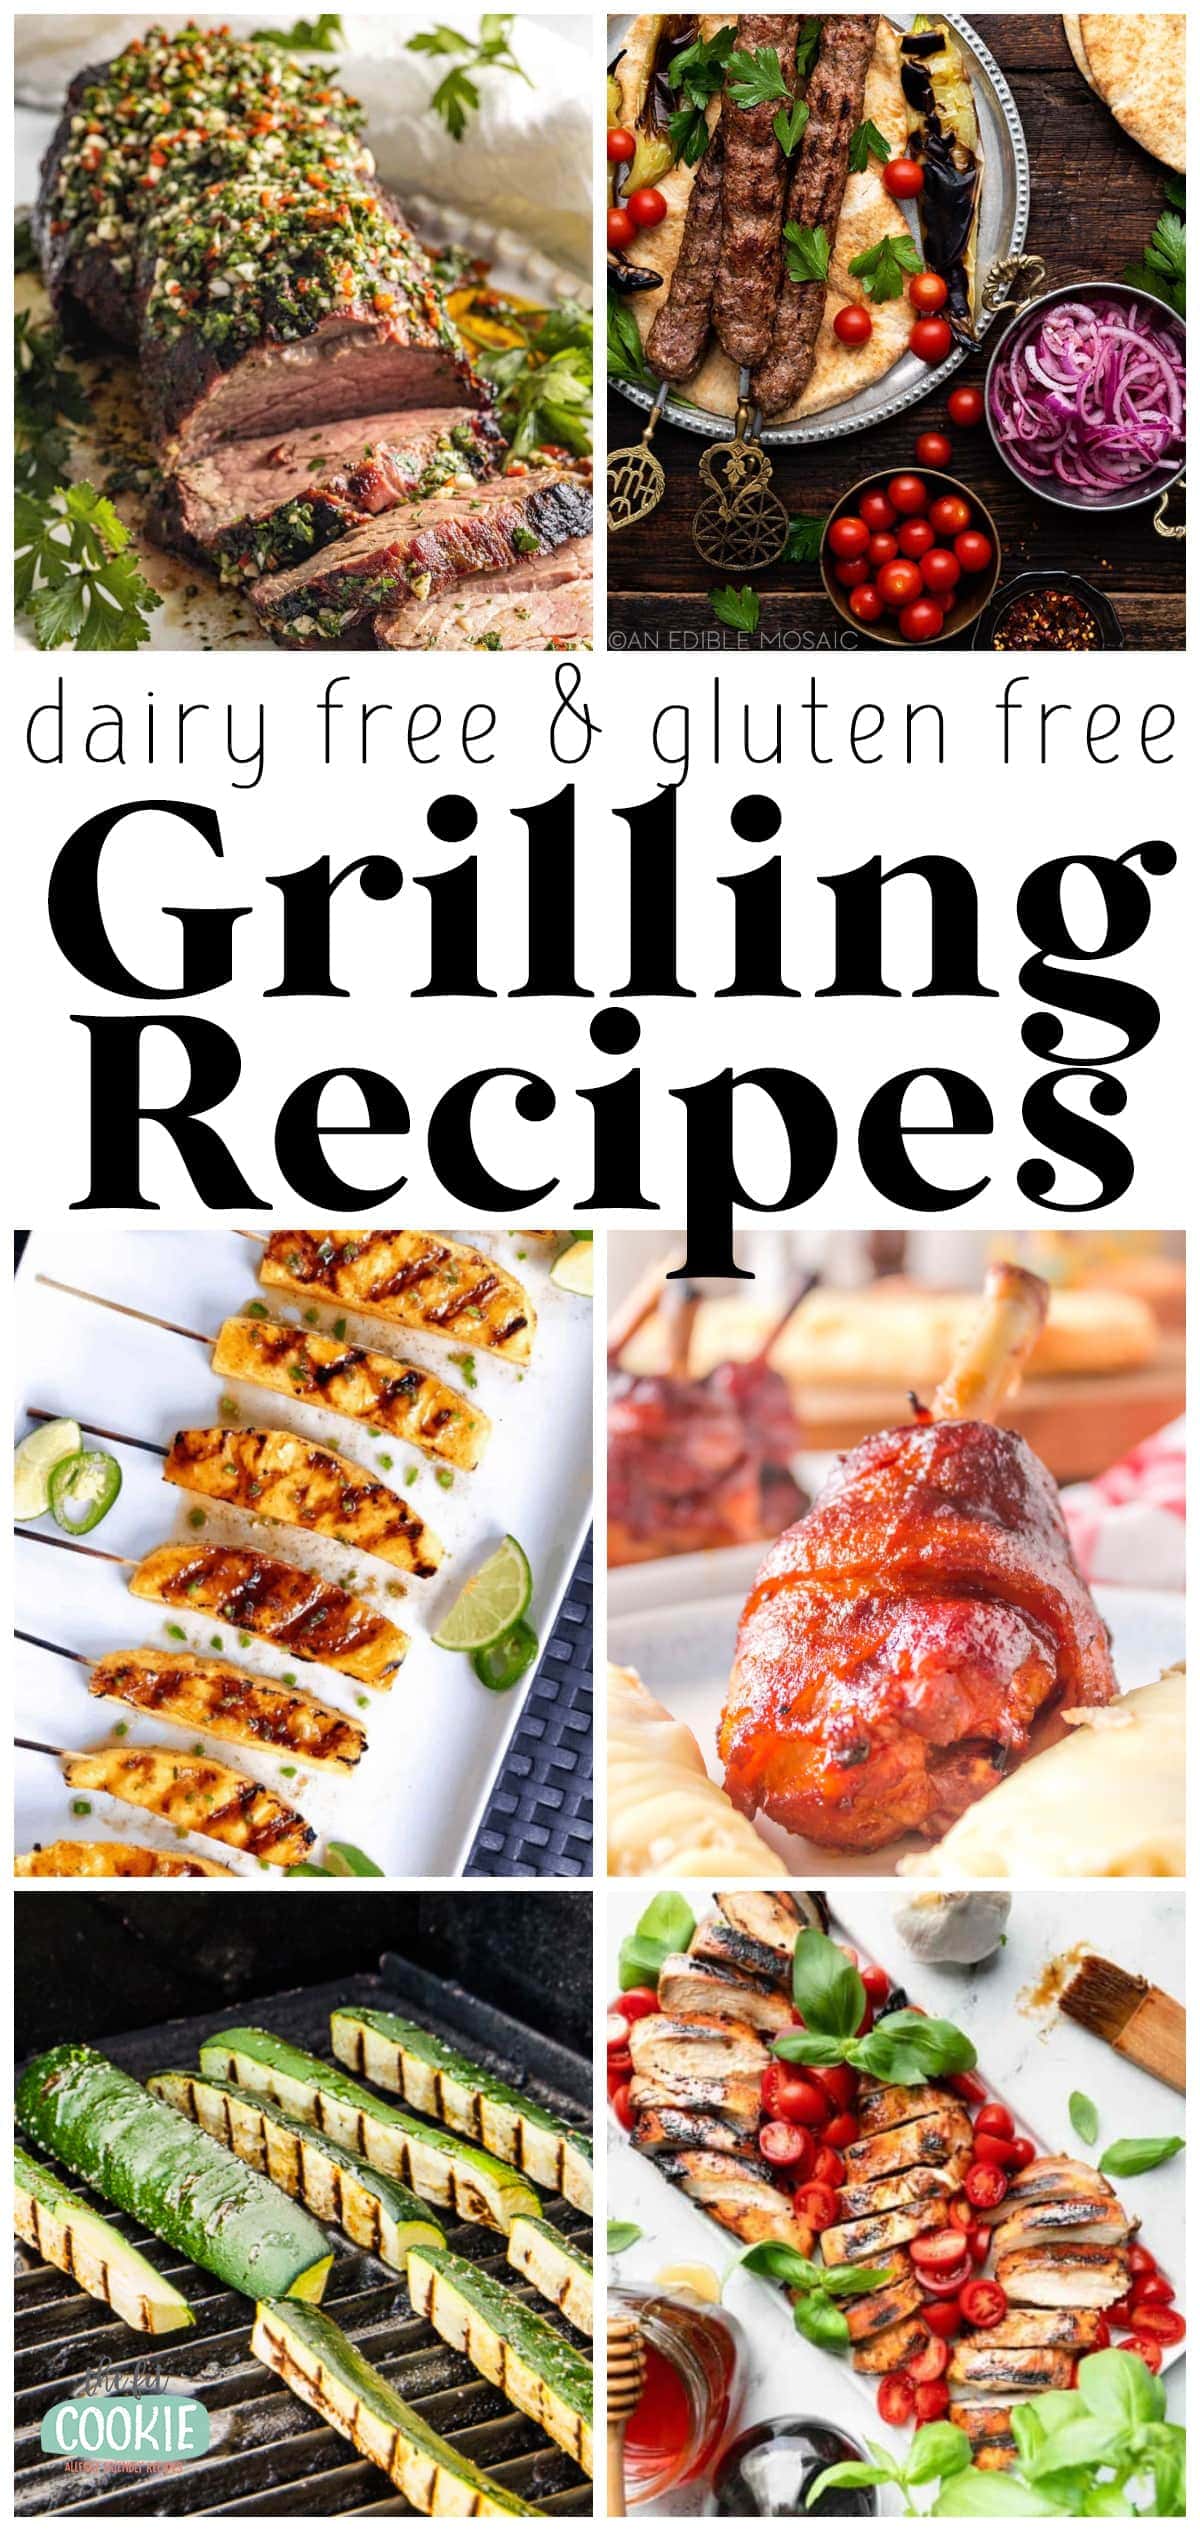 photo collage of different gluten free grilling recipes.